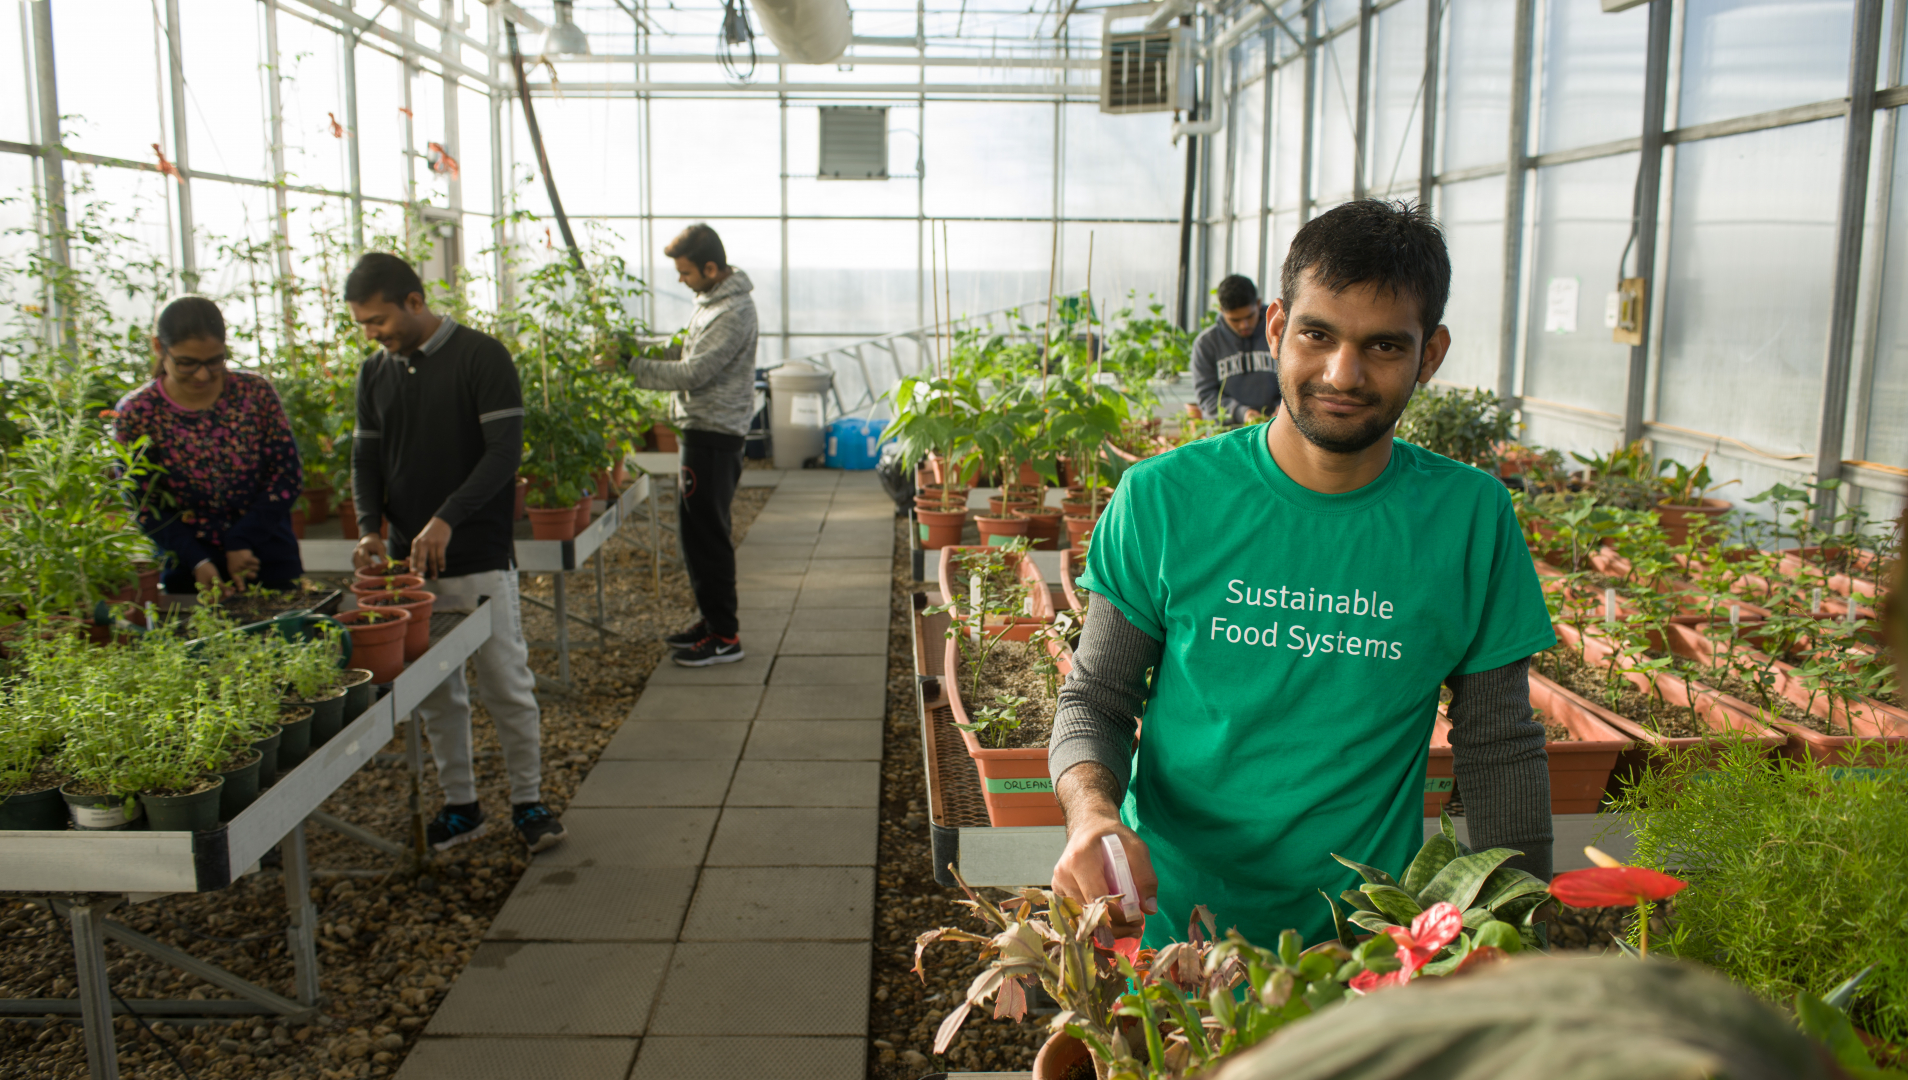 Student works in a greenhouse in the foreground while classmates work together behind him. 